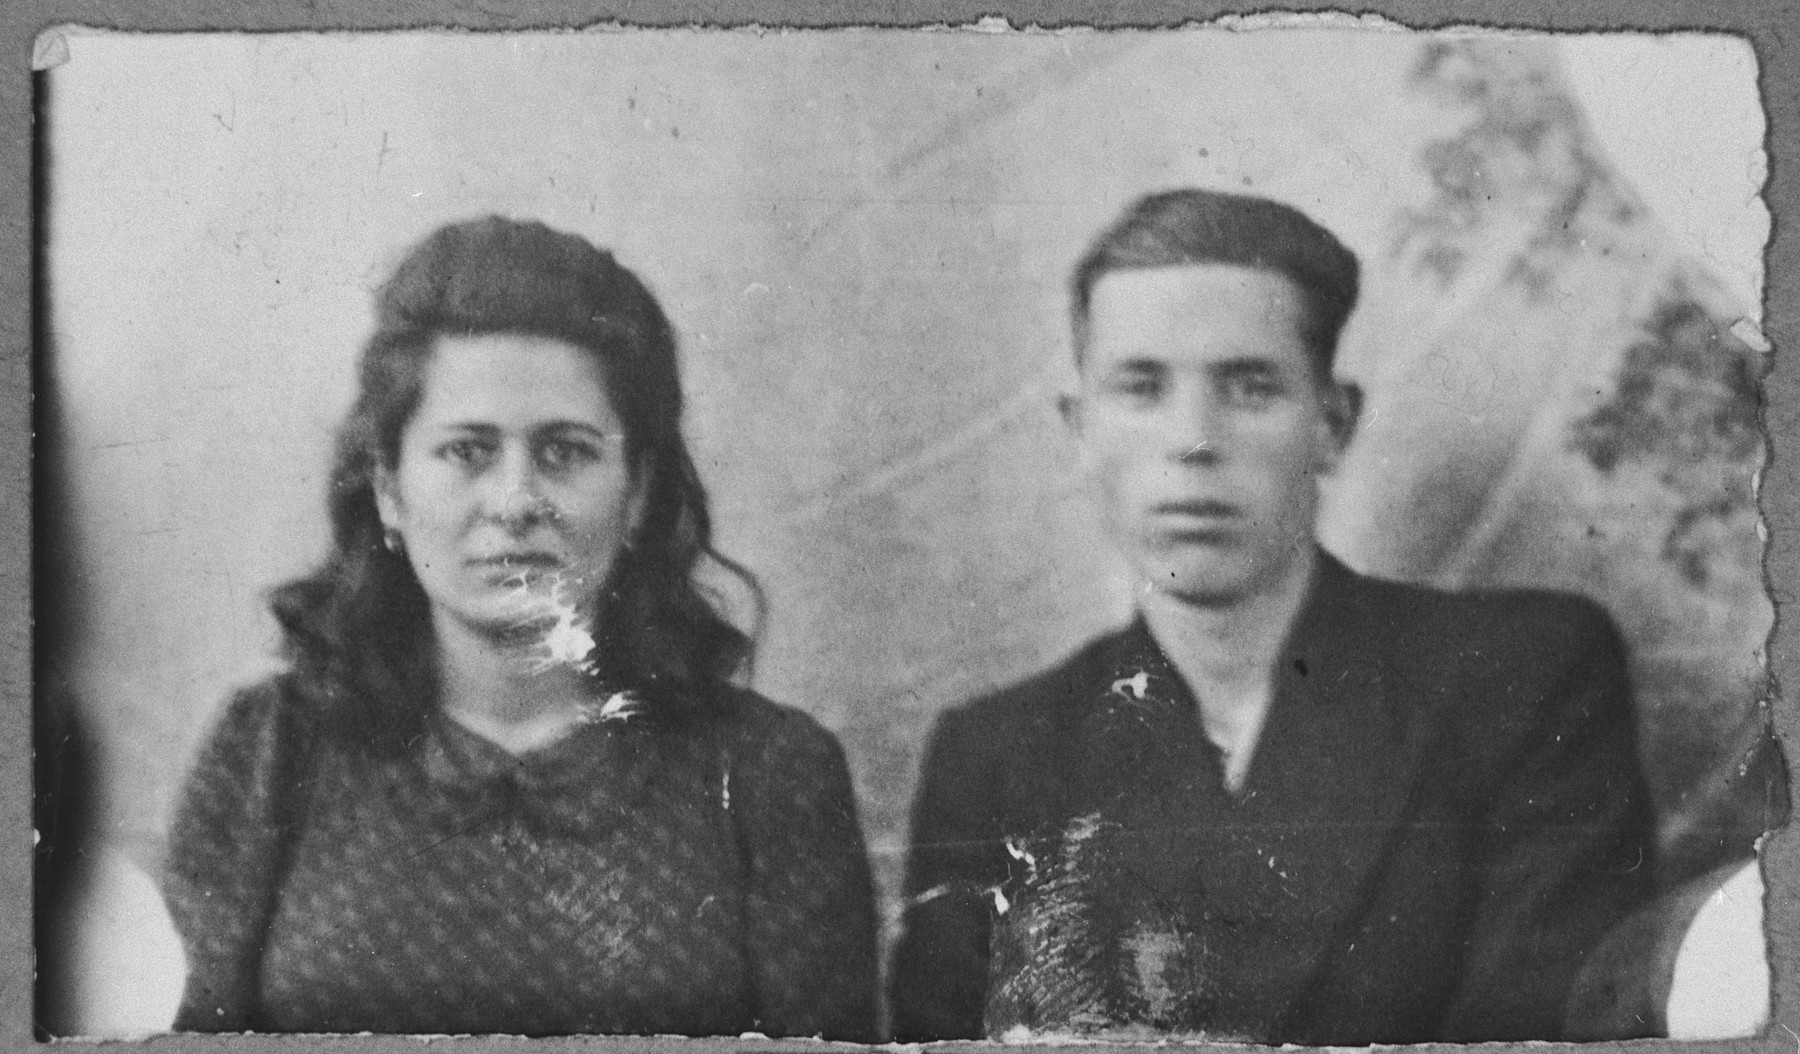 Portrait of David Albocher, son of Haim Albocher, and [his wife], Sara.  He was a greengrocer.  They lived at Kossantschitscheva 20 in Bitola.